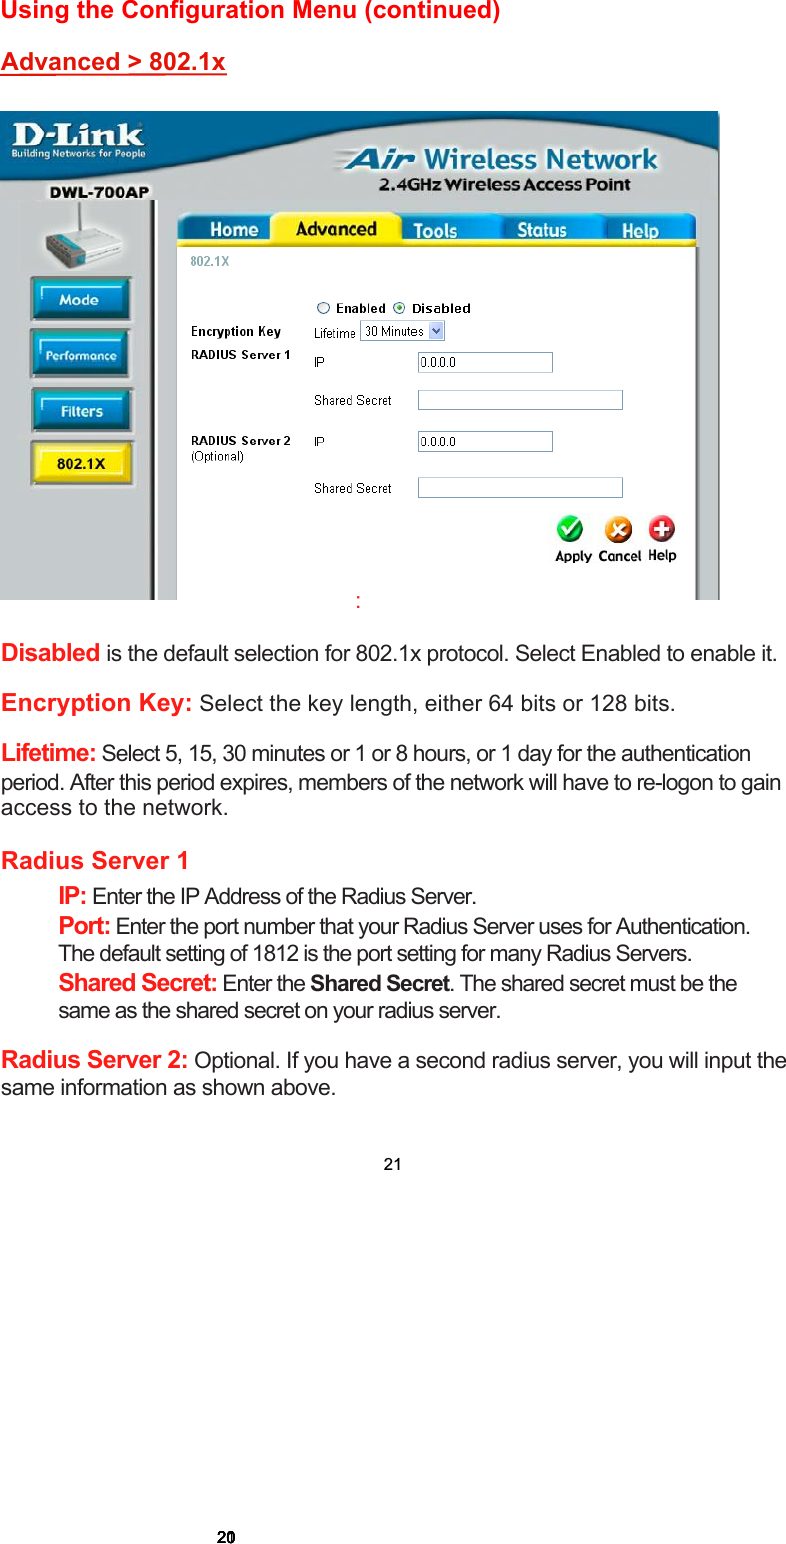 Disabled is the default selection for 802.1x protocol. Select Enabled to enable it.Encryption Key: Select the key length, either 64 bits or 128 bits.Lifetime: Select 5, 15, 30 minutes or 1 or 8 hours, or 1 day for the authenticationperiod. After this period expires, members of the network will have to re-logon to gainaccess to the network.Radius Server 1IP: Enter the IP Address of the Radius Server.Port: Enter the port number that your Radius Server uses for Authentication.The default setting of 1812 is the port setting for many Radius Servers.Shared Secret: Enter the Shared Secret. The shared secret must be thesame as the shared secret on your radius server.Radius Server 2: Optional. If you have a second radius server, you will input the same information as shown above.Advanced &gt; 802.1x:20202020202121Using the Configuration Menu (continued) 